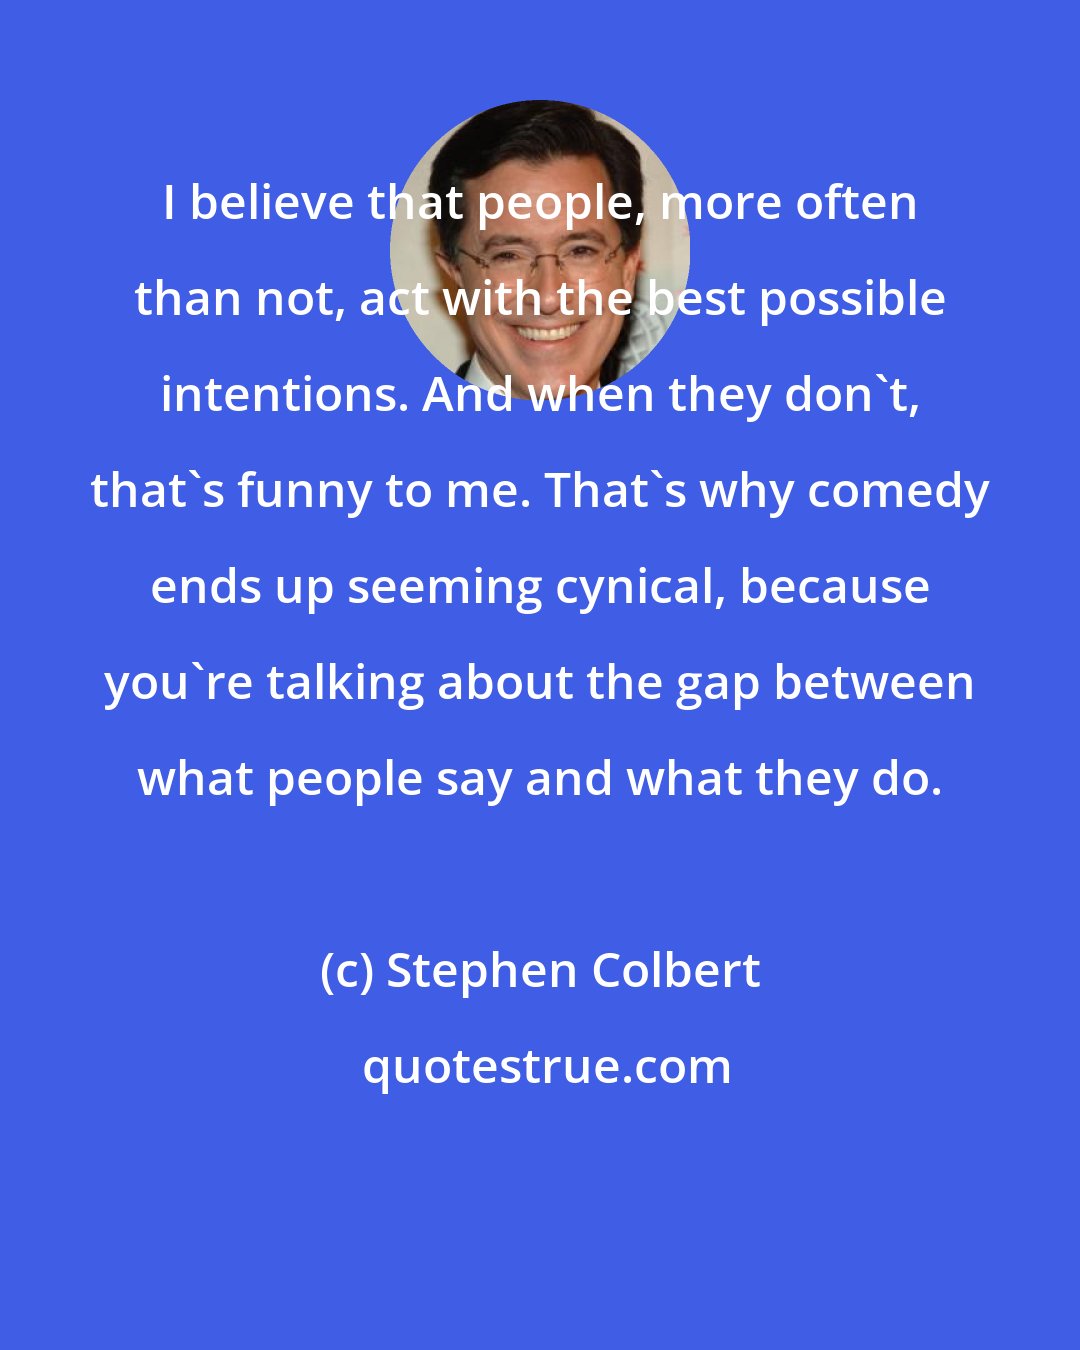 Stephen Colbert: I believe that people, more often than not, act with the best possible intentions. And when they don't, that's funny to me. That's why comedy ends up seeming cynical, because you're talking about the gap between what people say and what they do.